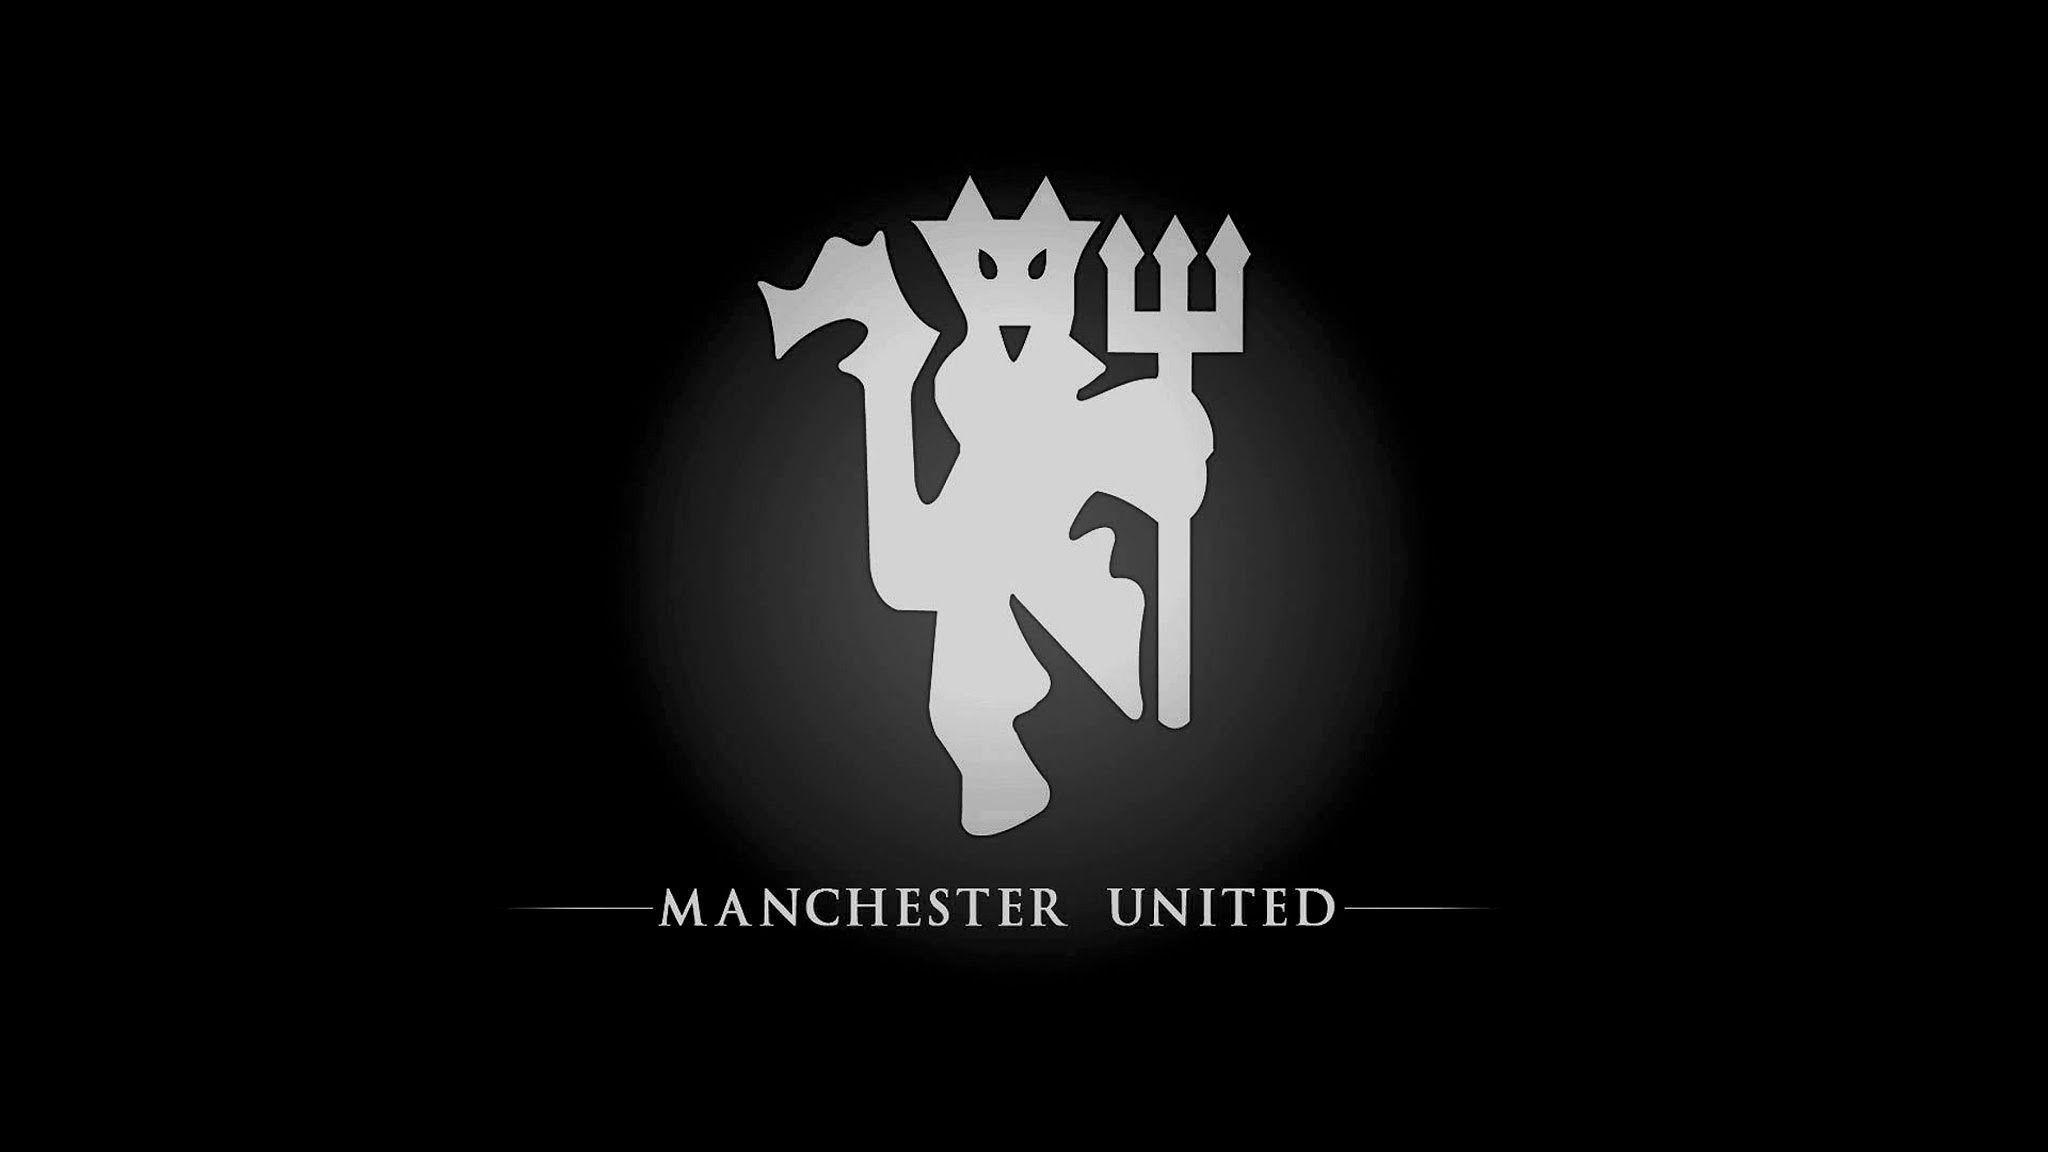 2048x1152 Manchester United Black Wallpapers For Iphone